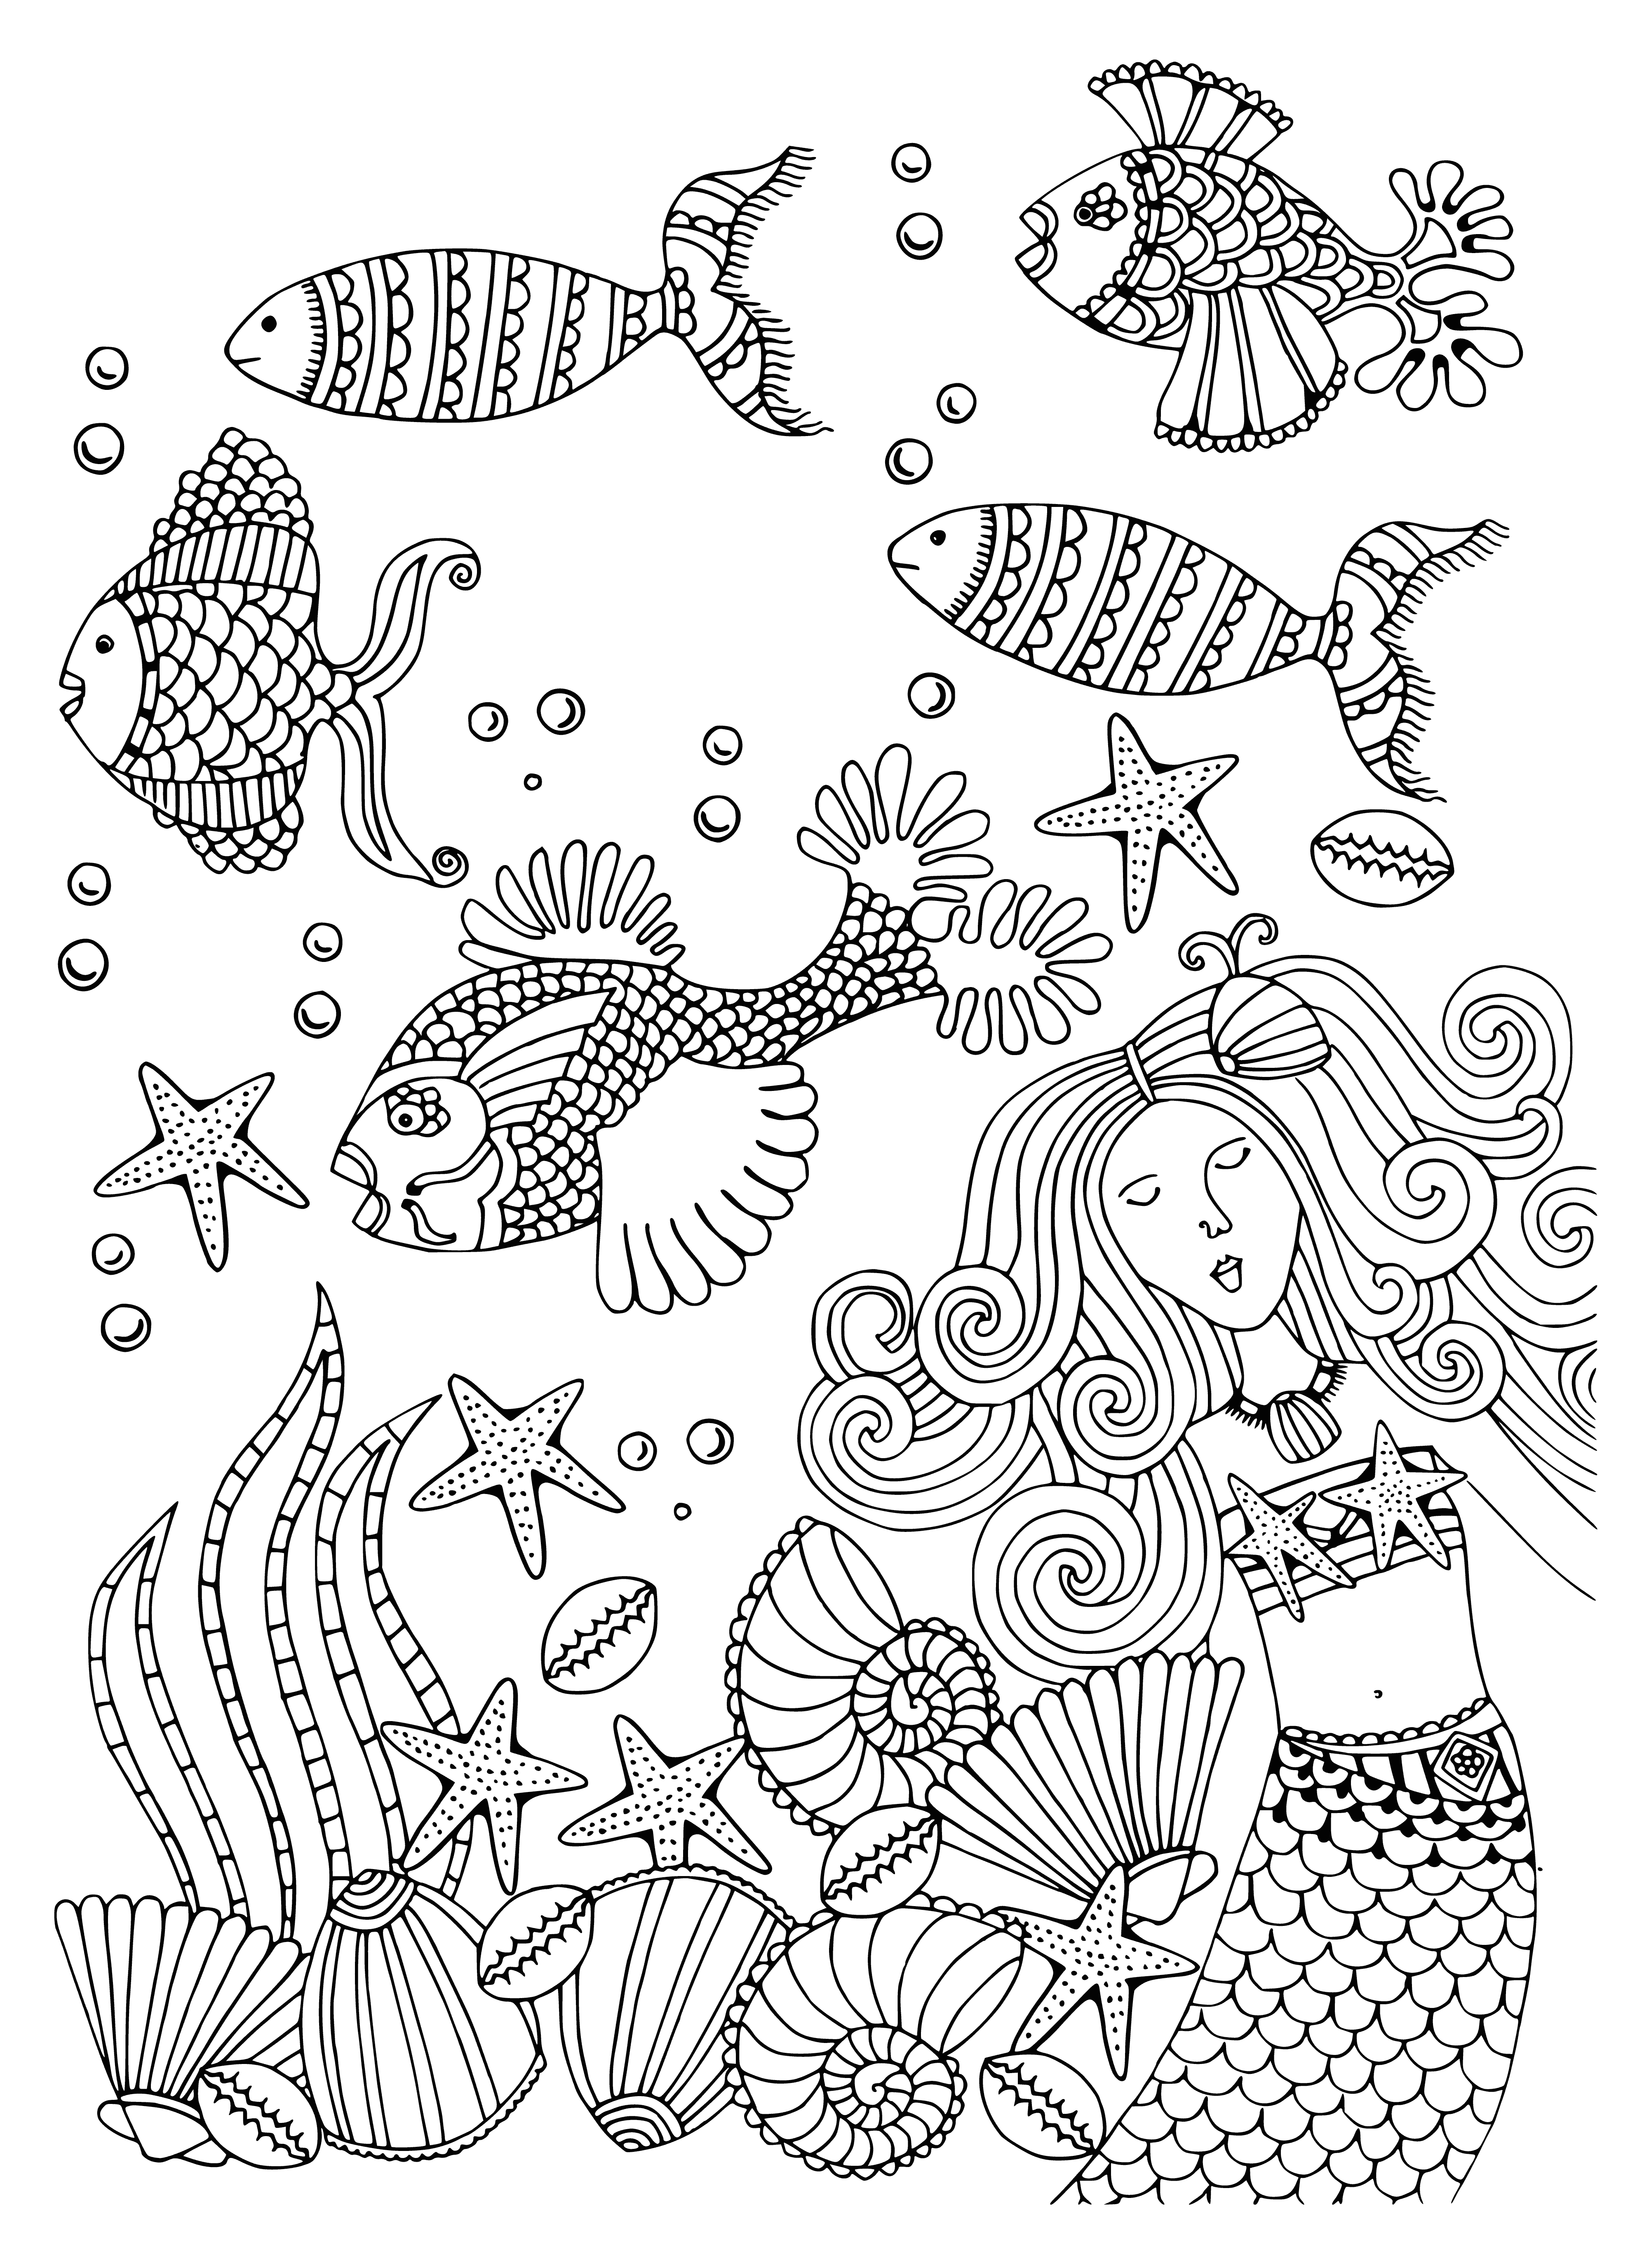 Mermaid with fishes coloring page